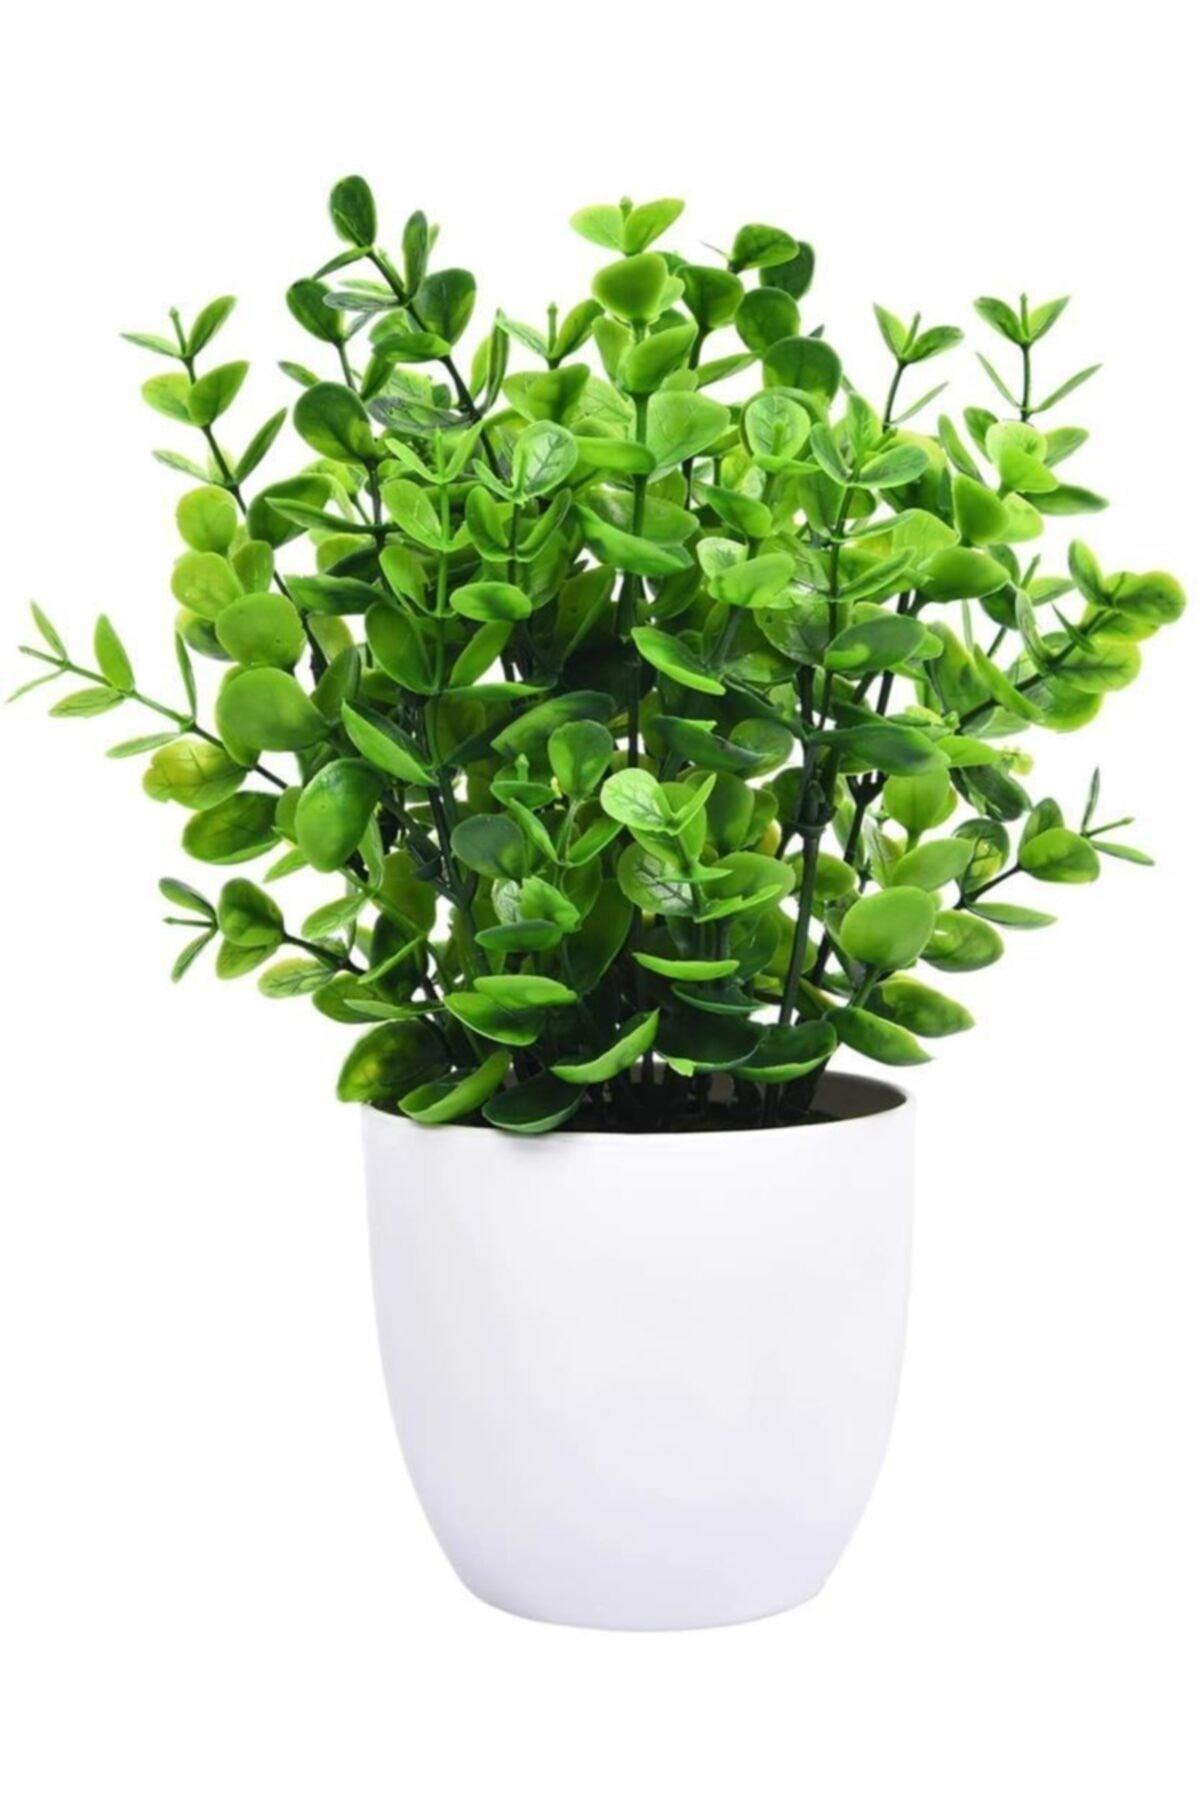 Artificial Flower White Potted Green Boxwood Decorative Table Flower - Swordslife